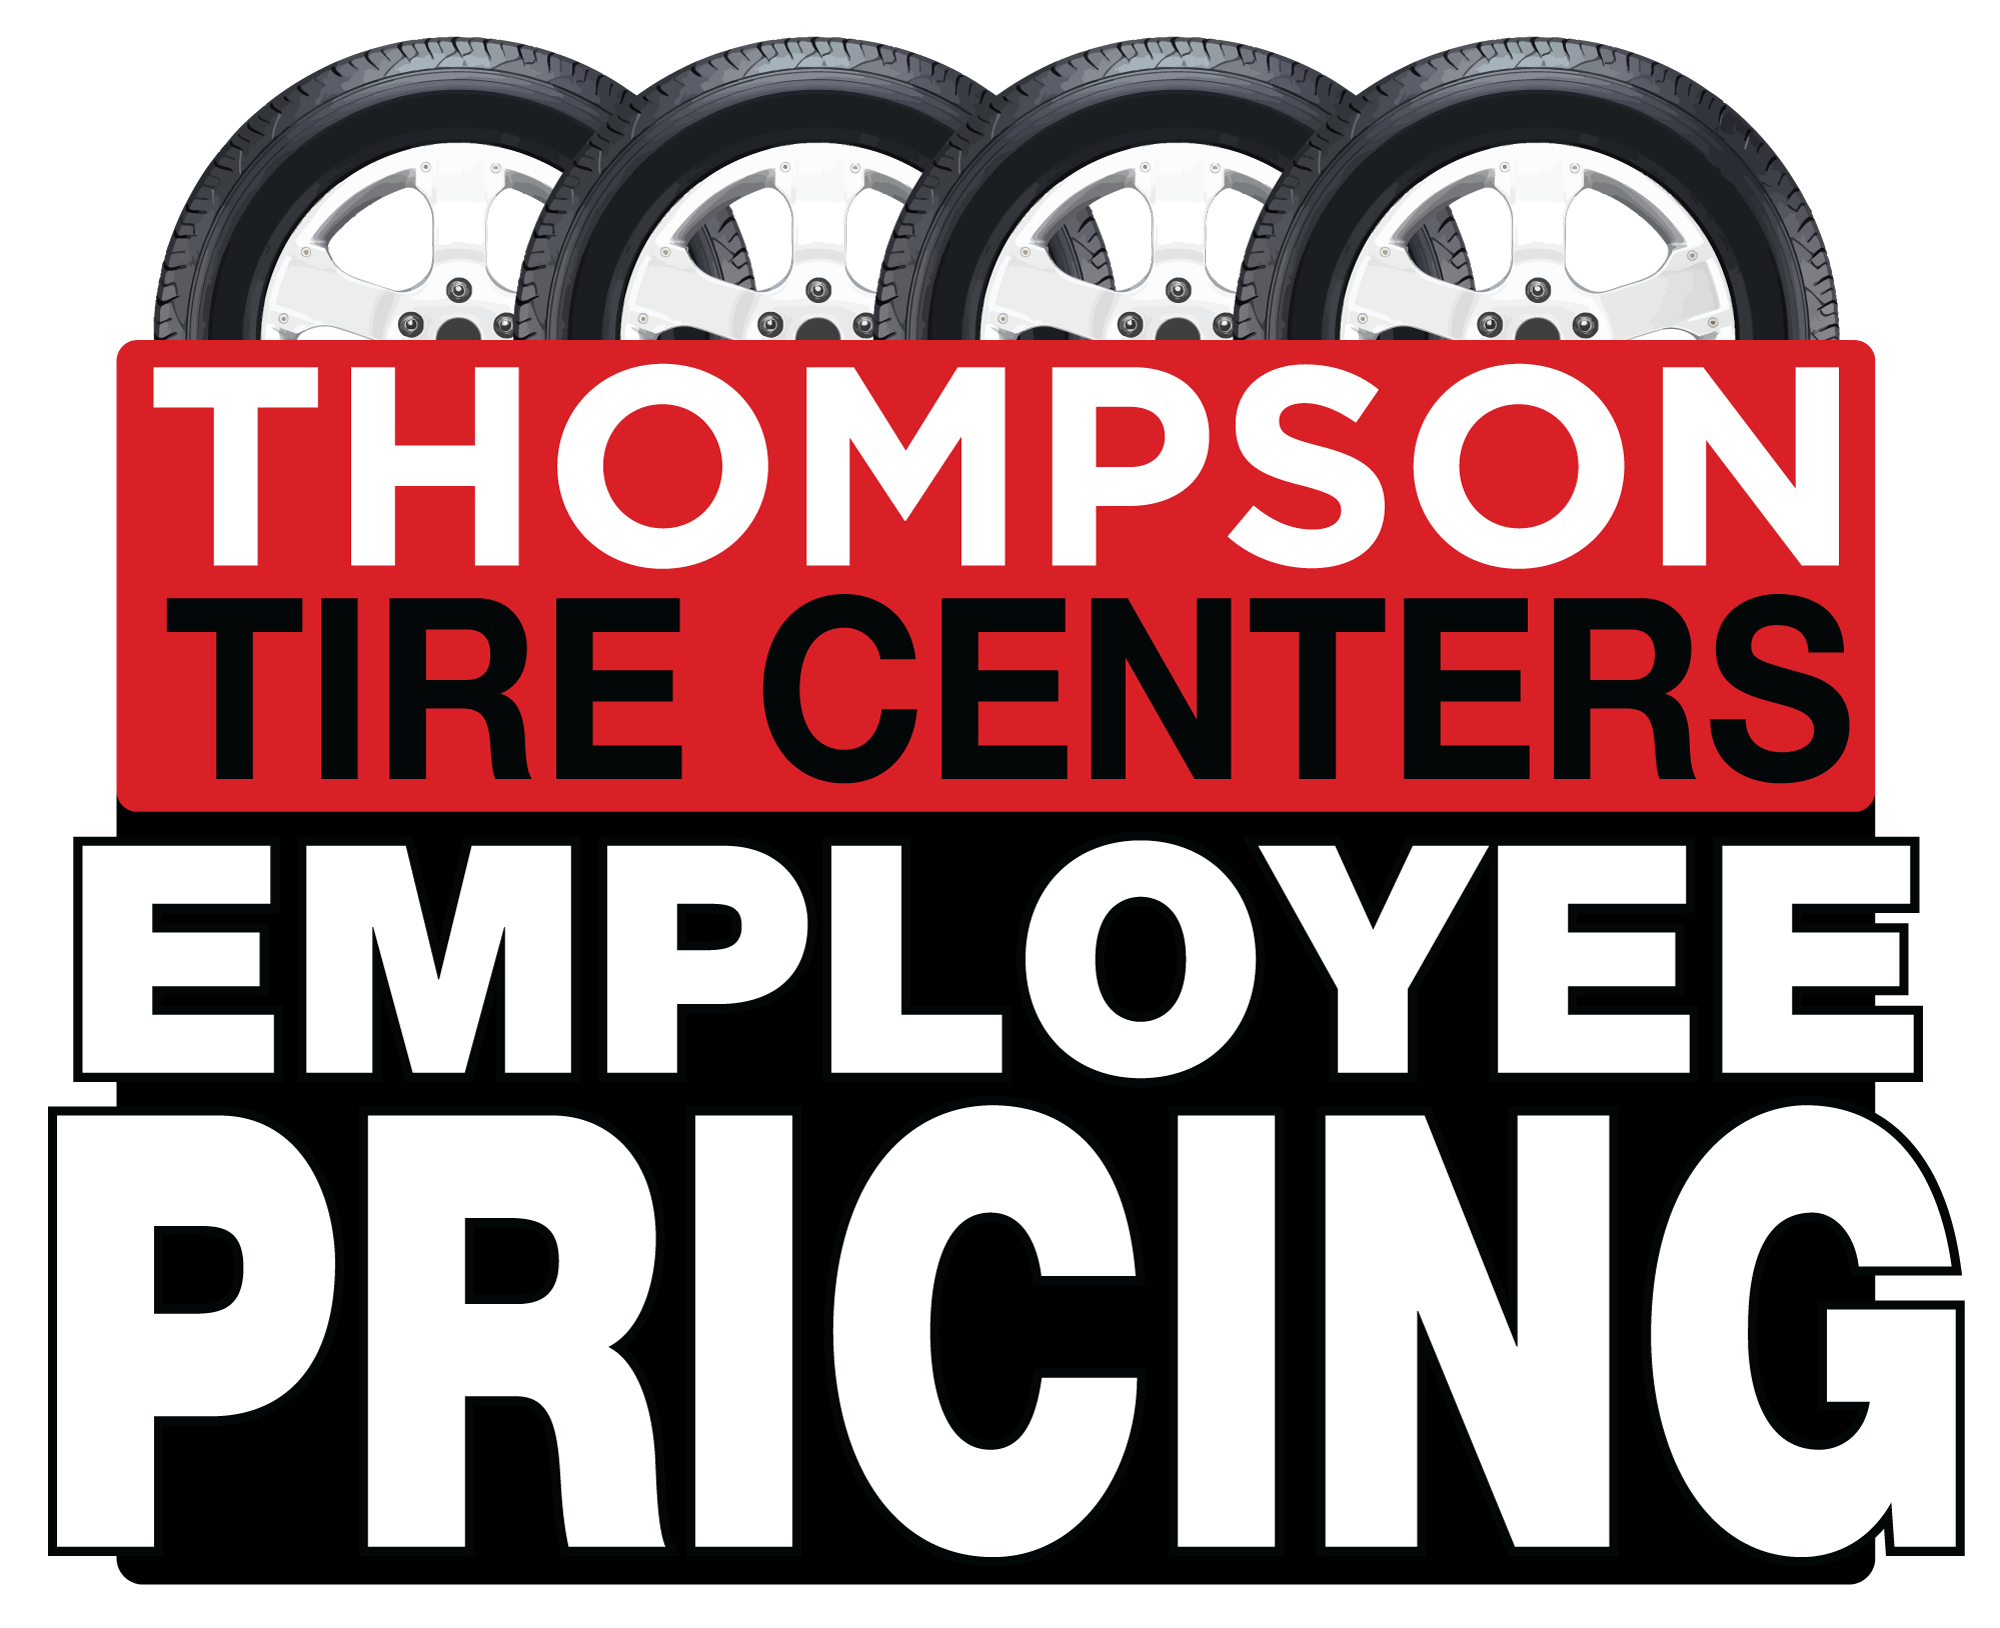 Toyota Tire Sale Buy 3 Tires Get 1 Free at Thompson Toyota Tire